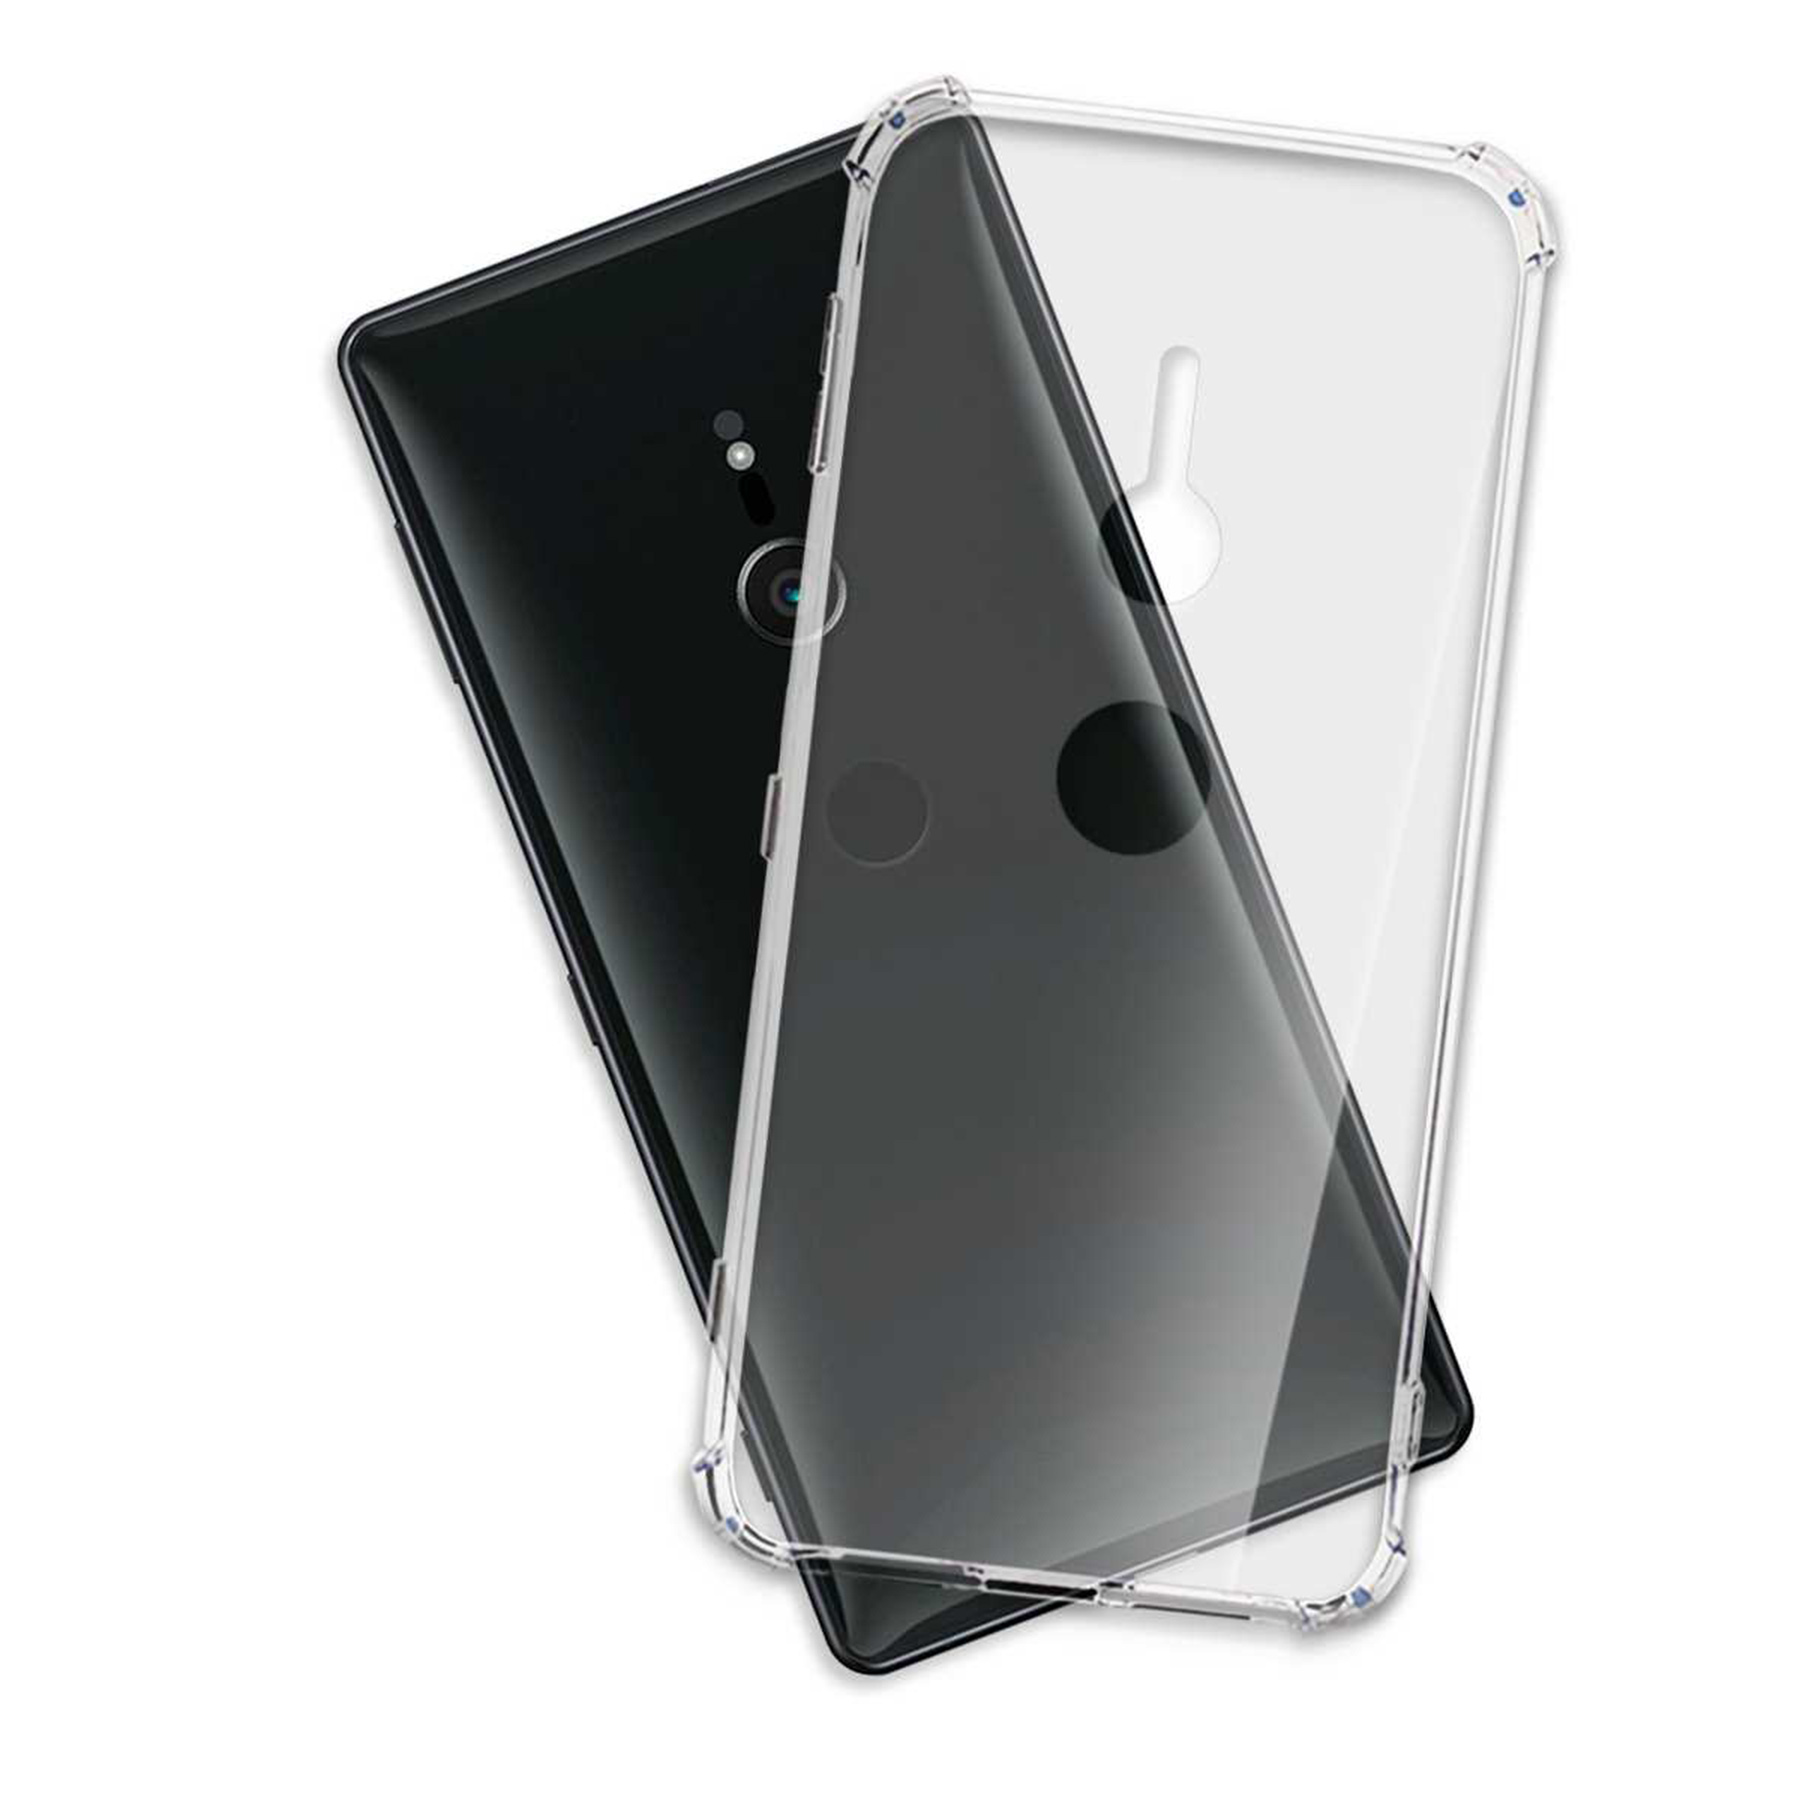 Sony, ENERGY Case, Armor Xperia XZ2, MTB Transparent Clear MORE Backcover,